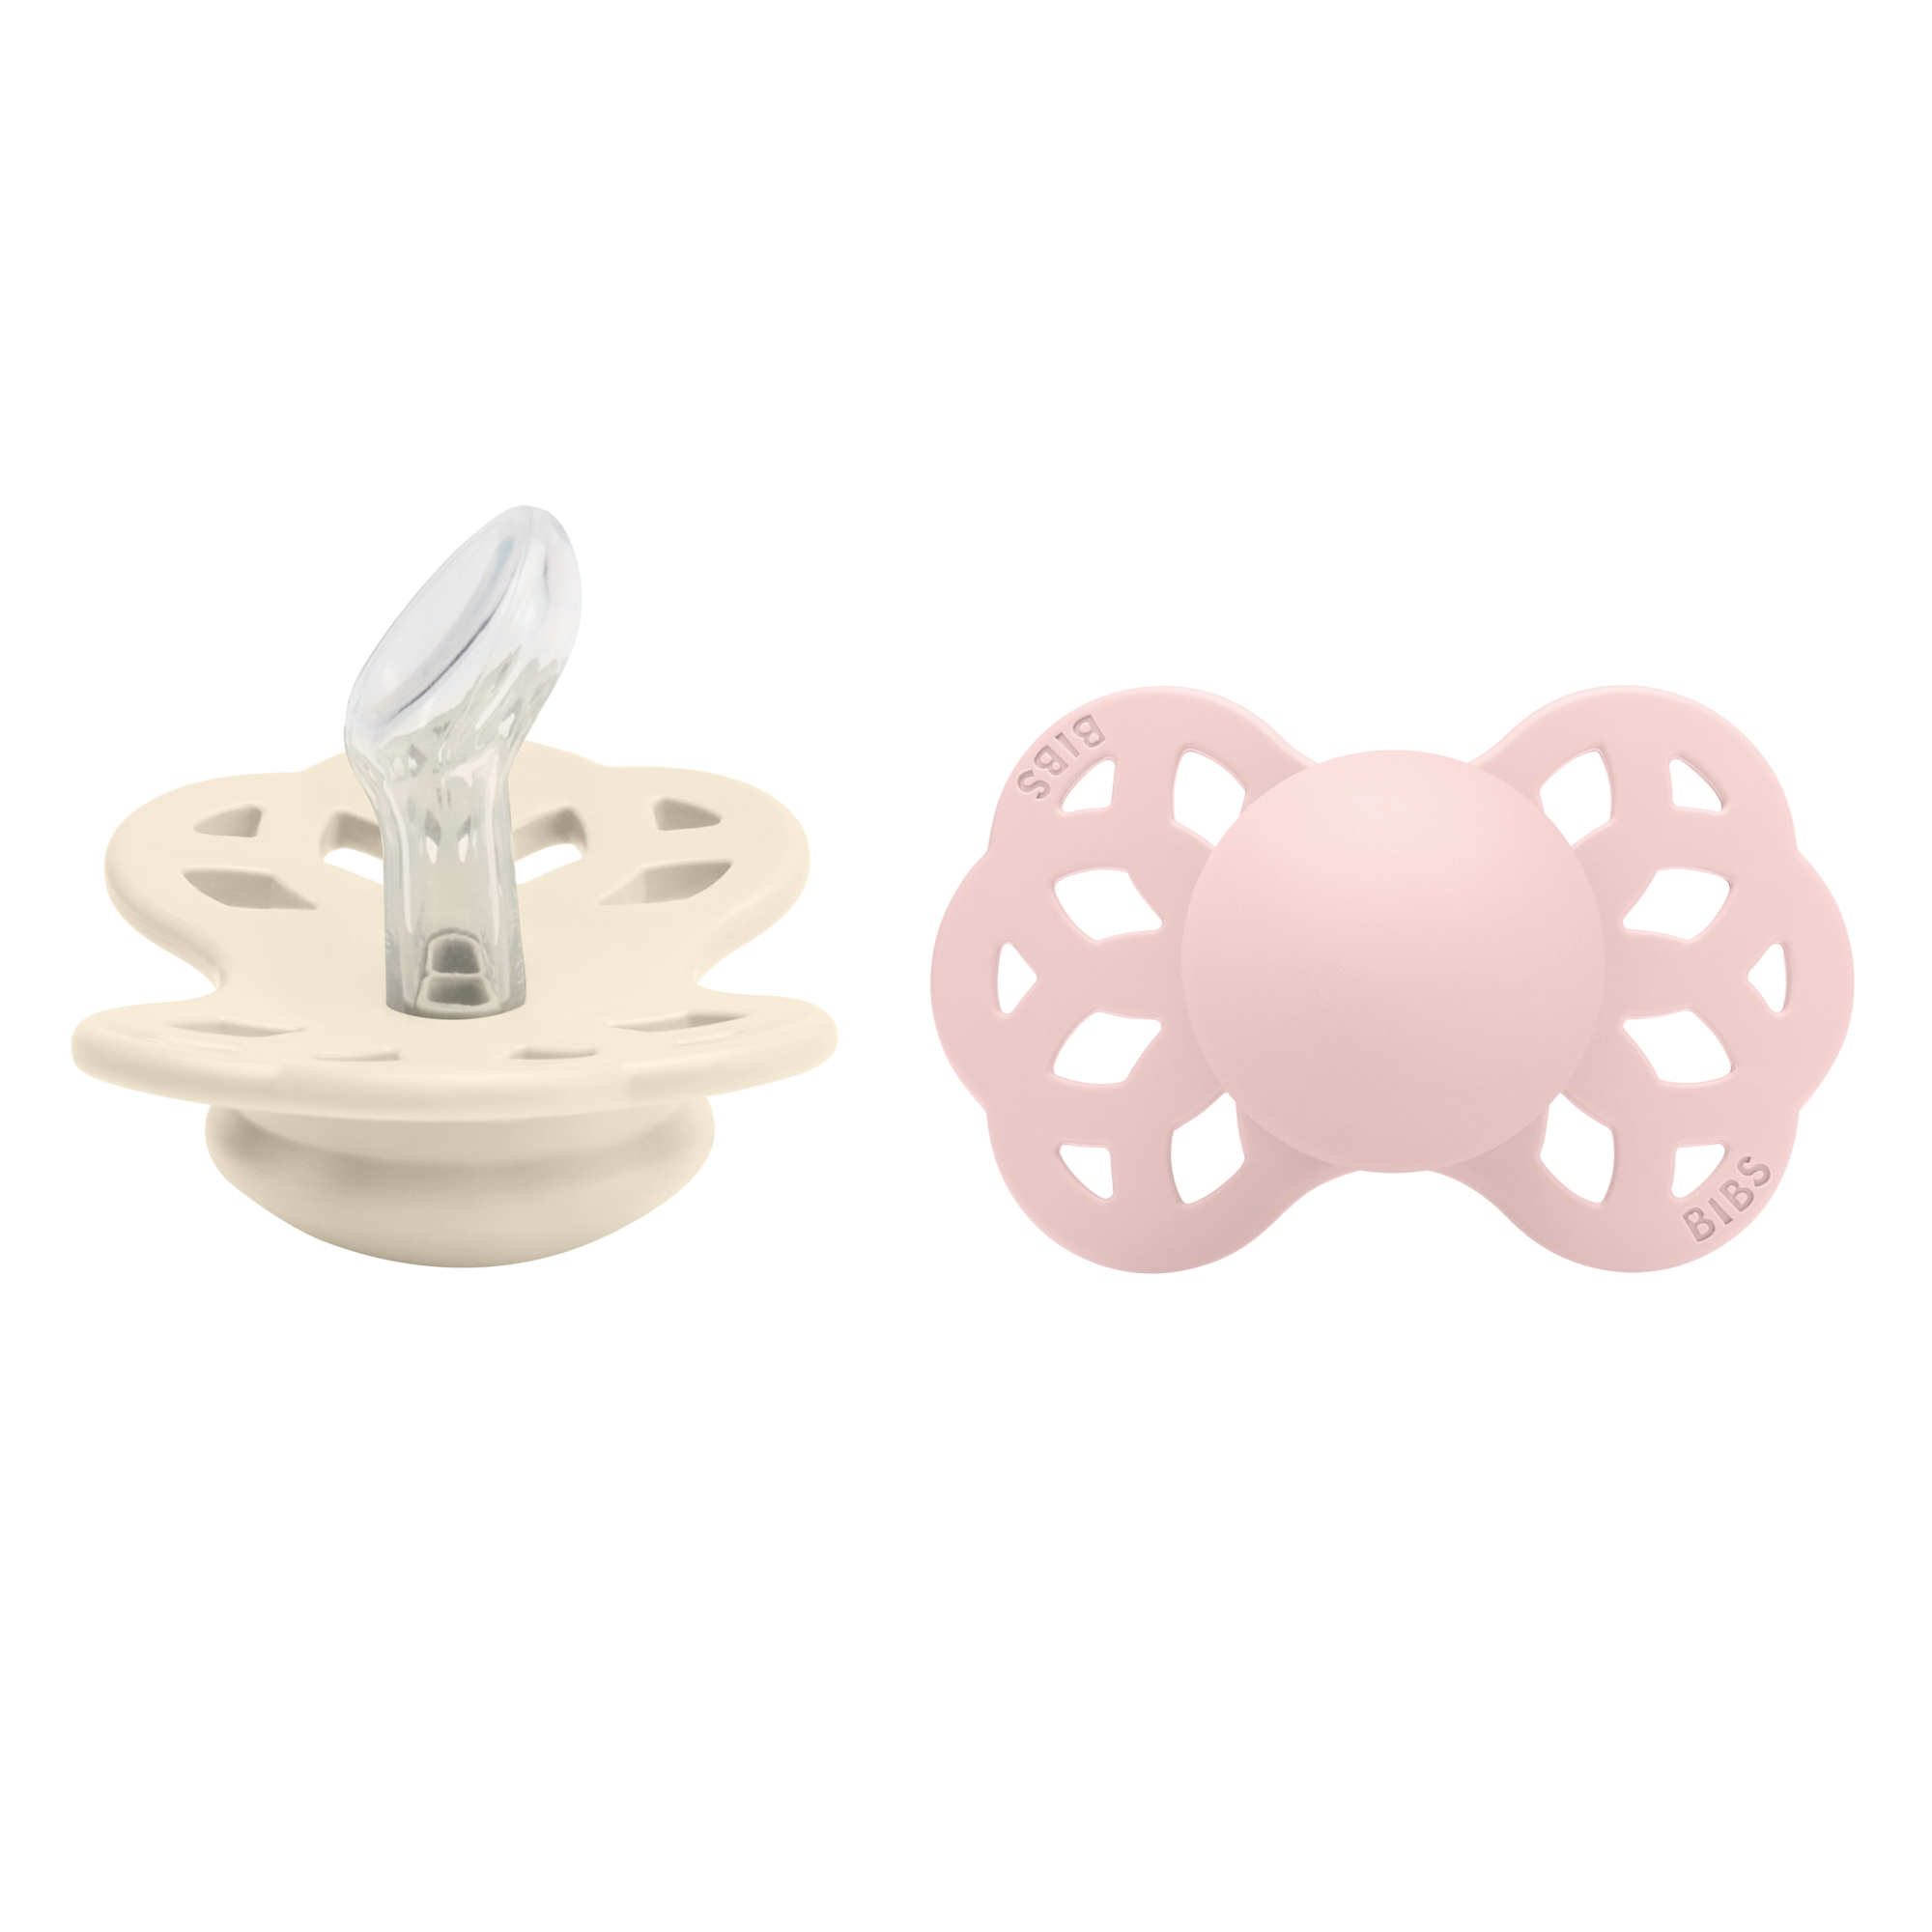 Bibs Infinity 2 Pack Silicone Anatomical Size 1 Ivory/Blush